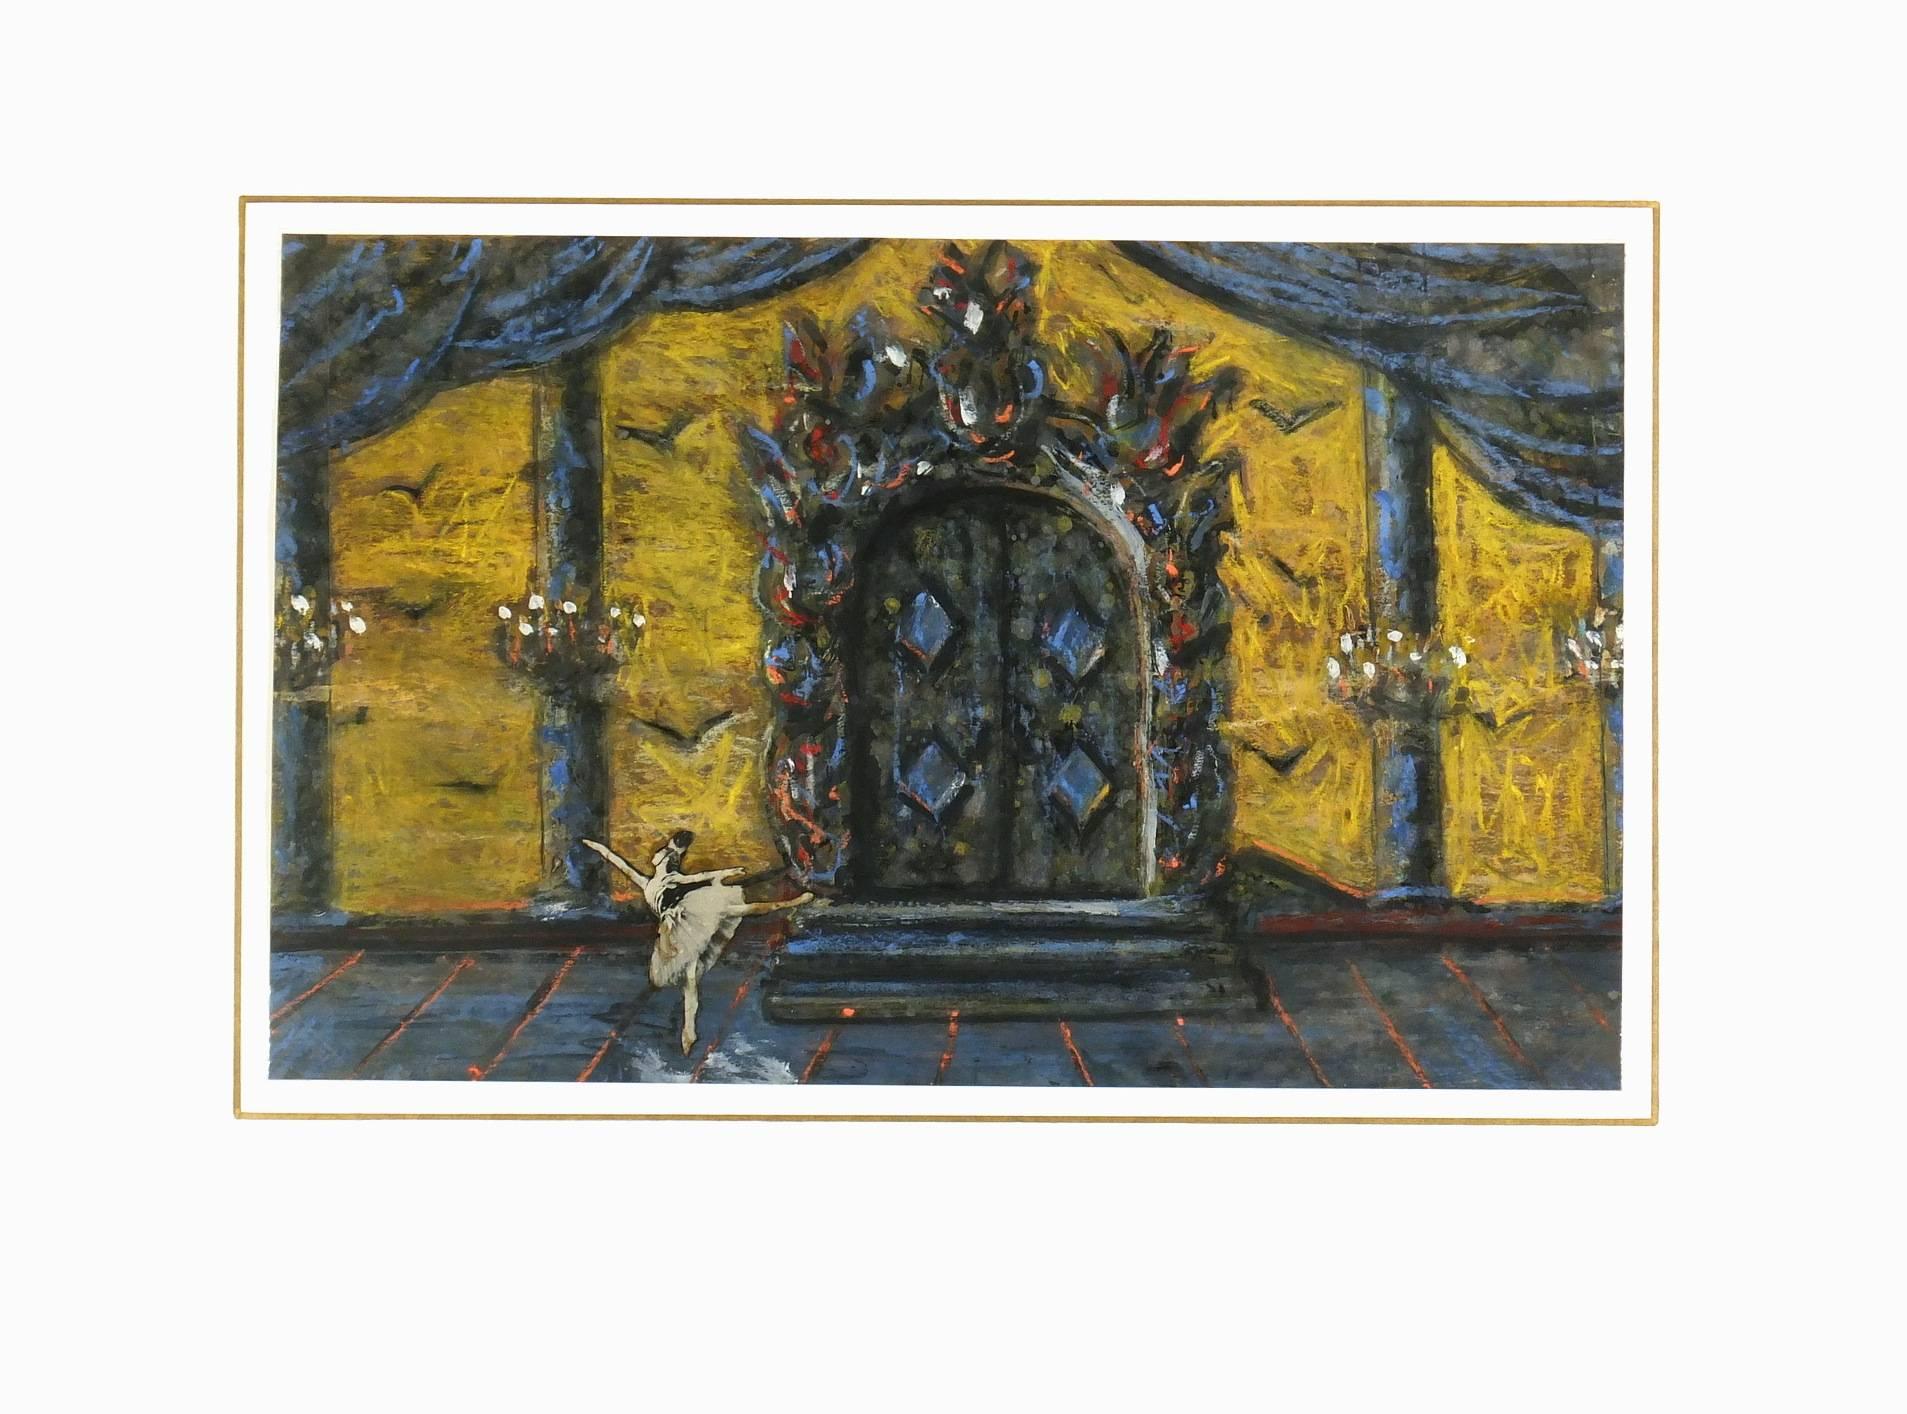 Whimsical oil pastel drawing of an elaborate theater stage hosting a single ballerina made of a vintage photograph by Eli Berg, circa 1940. 

Original artwork on paper displayed on a white mat with a gold border. Mat fits a standard-size frame.